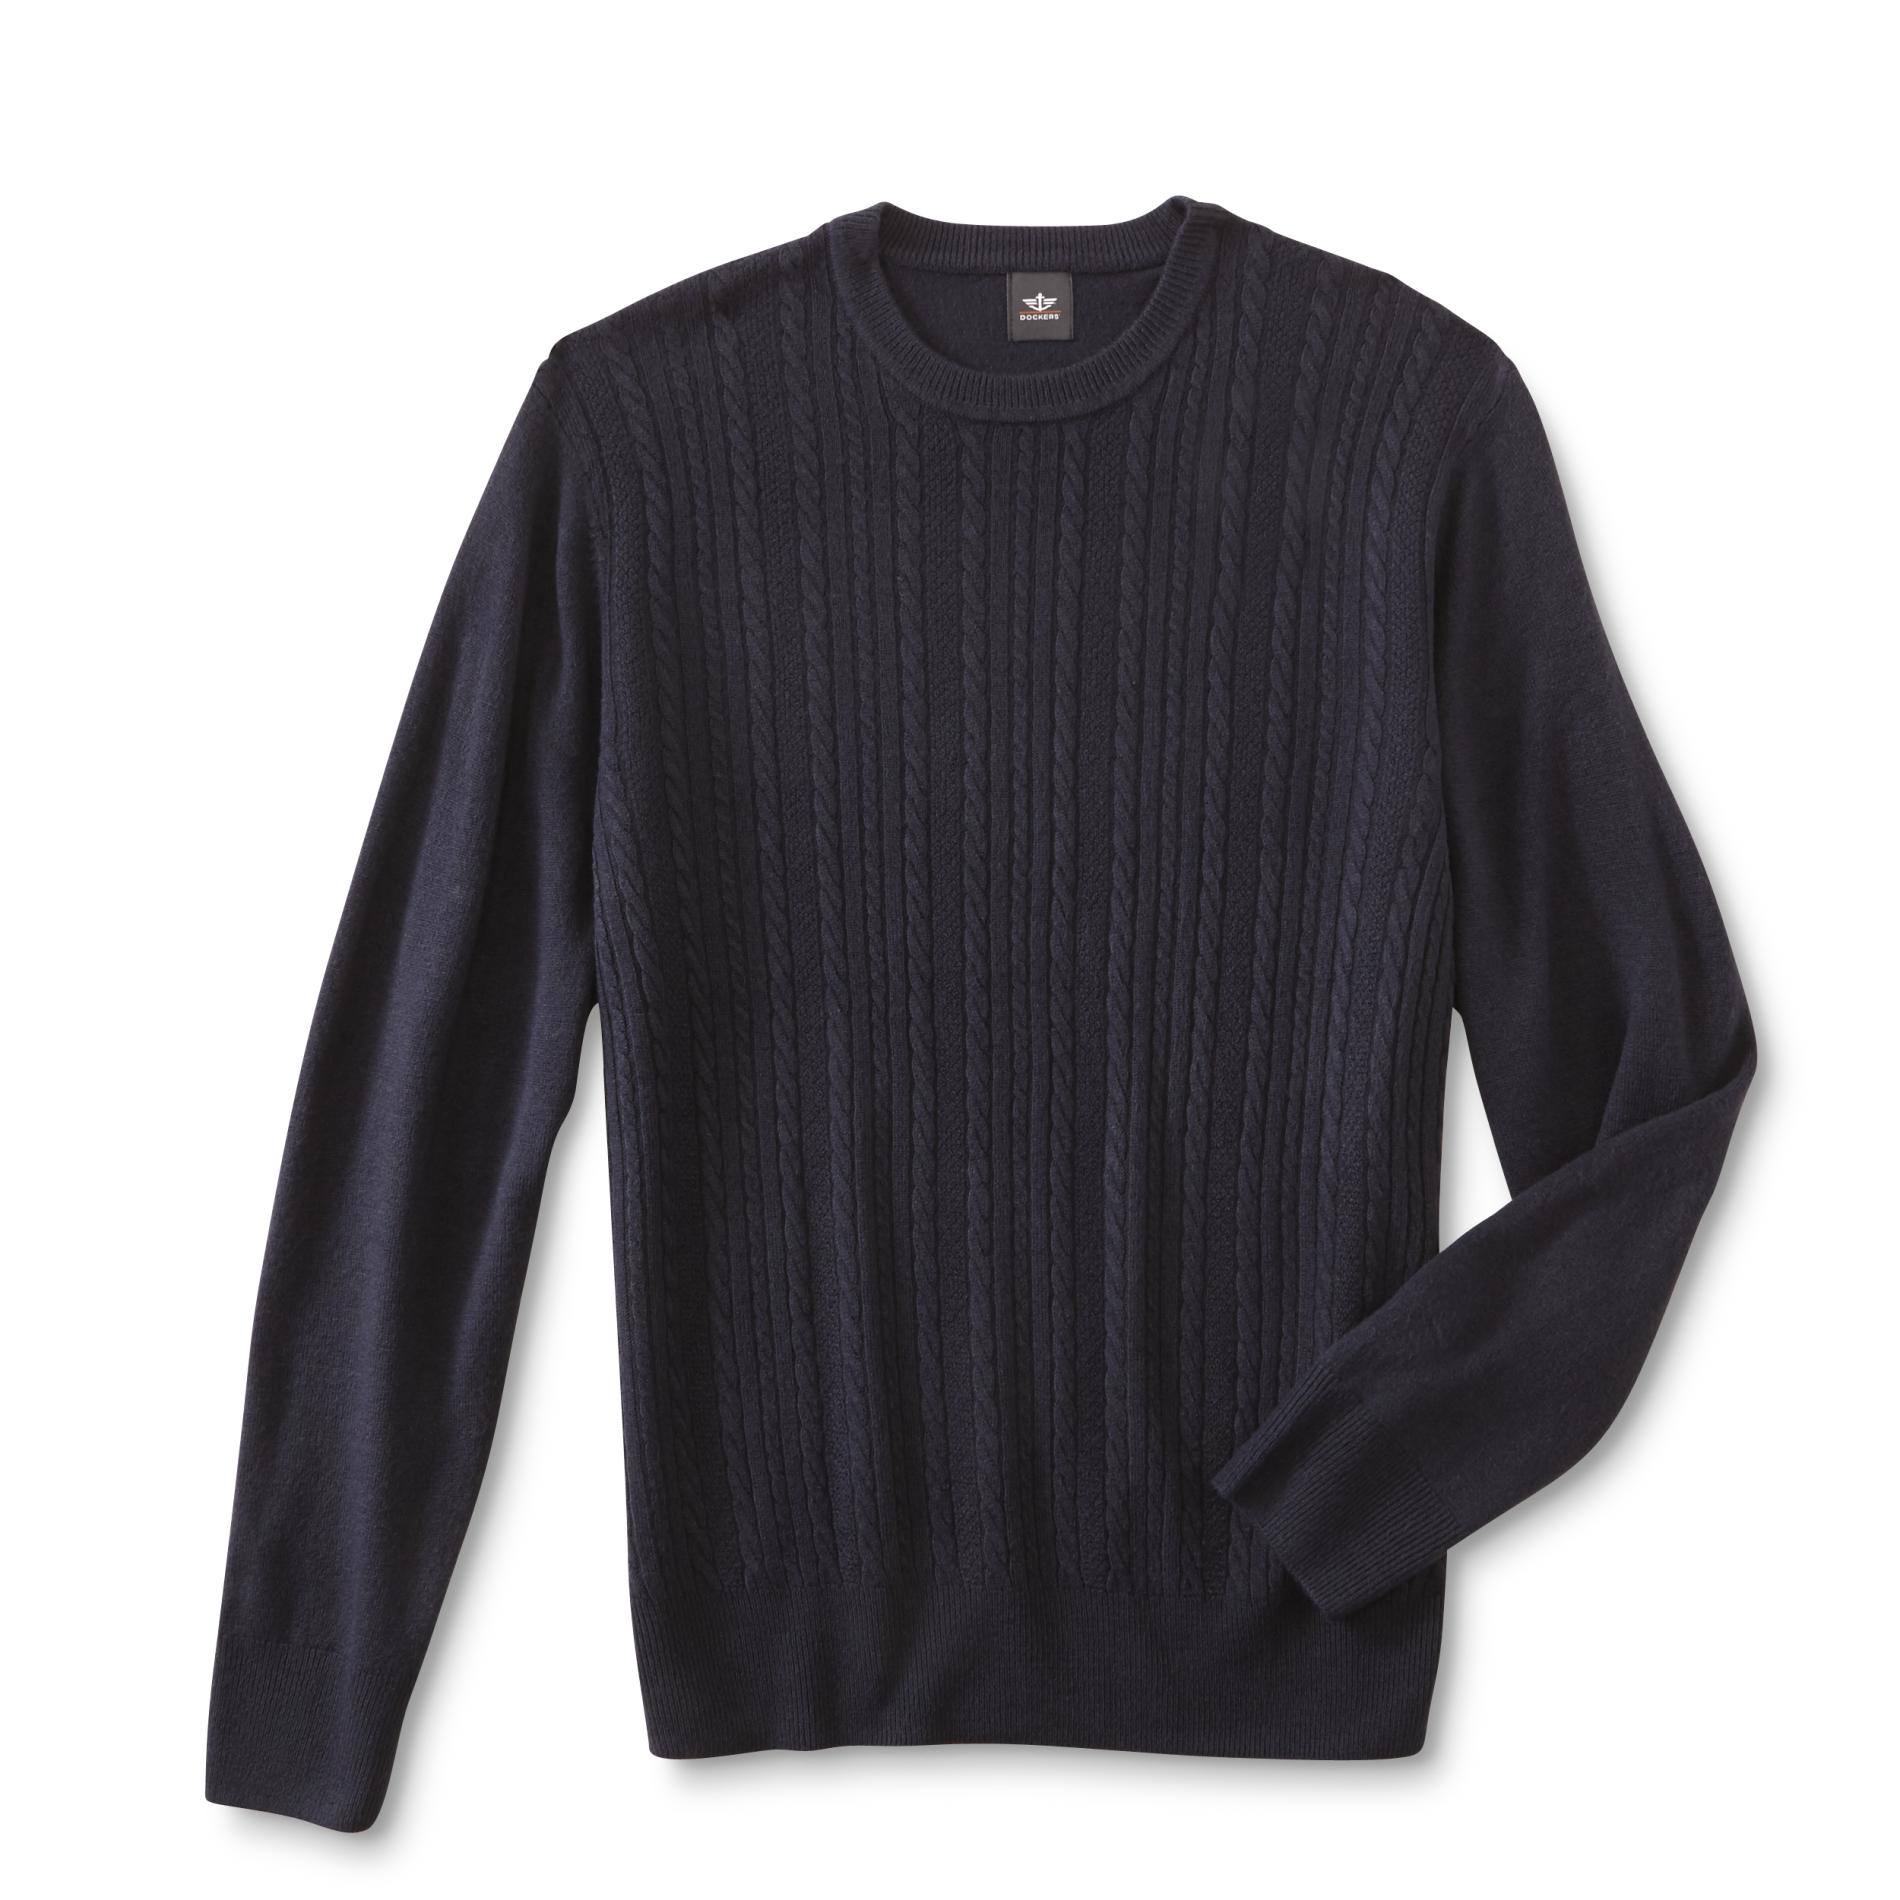 Dockers Men's Cable Knit Sweater